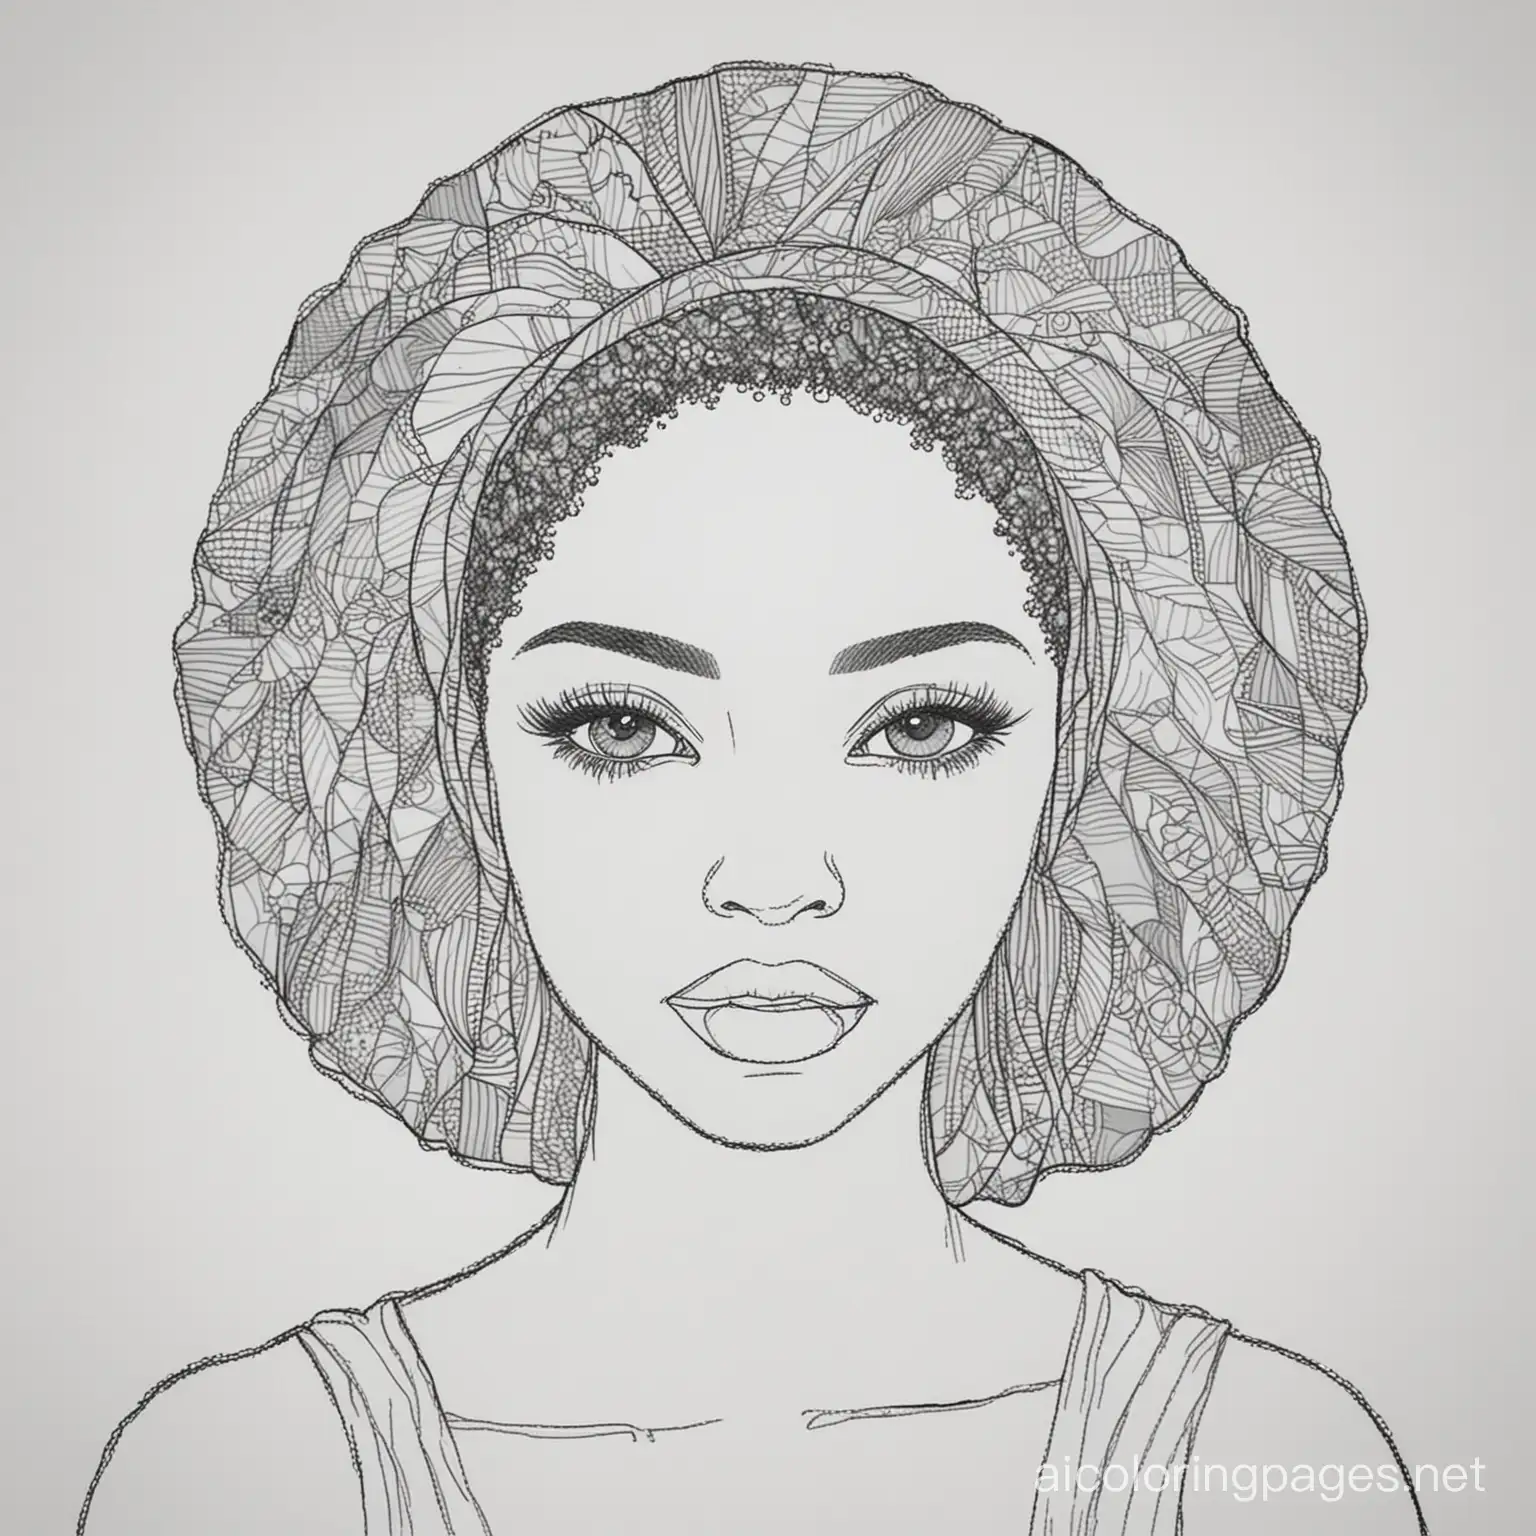 beautiful african american women, Coloring Page, black and white, line art, white background, Simplicity, Ample White Space. The background of the coloring page is plain white to make it easy for young children to color within the lines. The outlines of all the subjects are easy to distinguish, making it simple for kids to color without too much difficulty